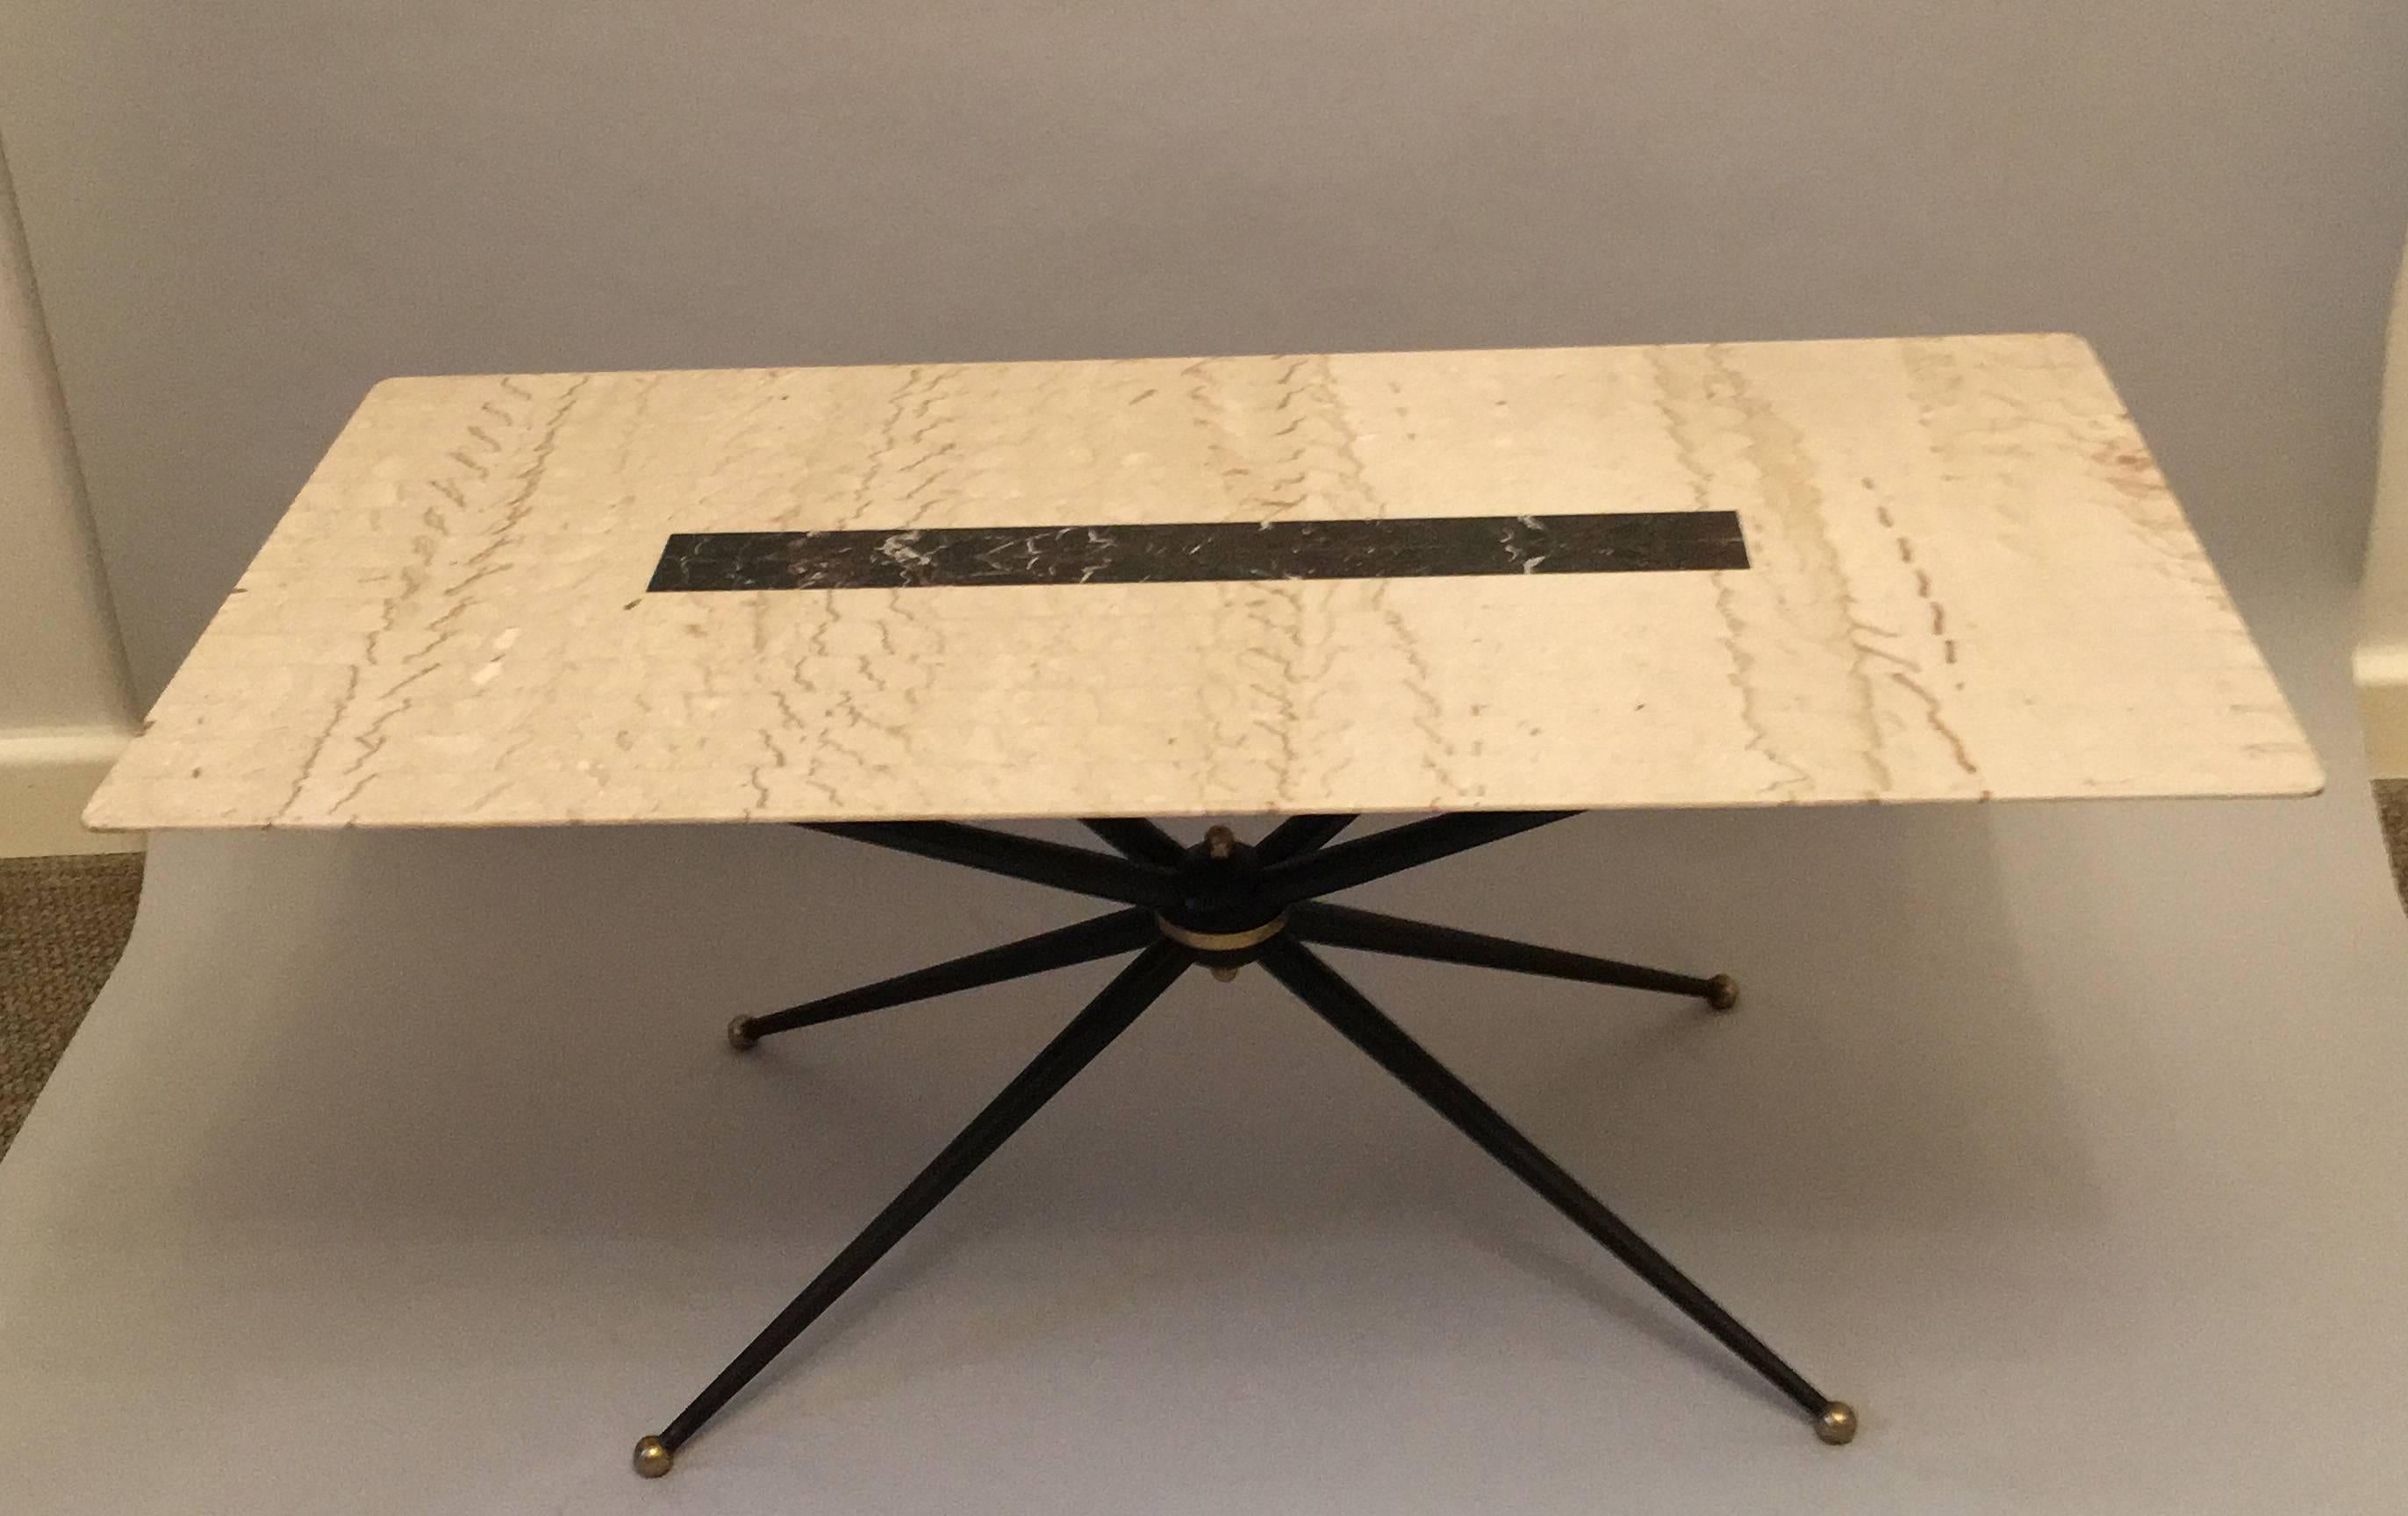 Italian sputnik coffee table with marble top. Iron Legs with brass ends.